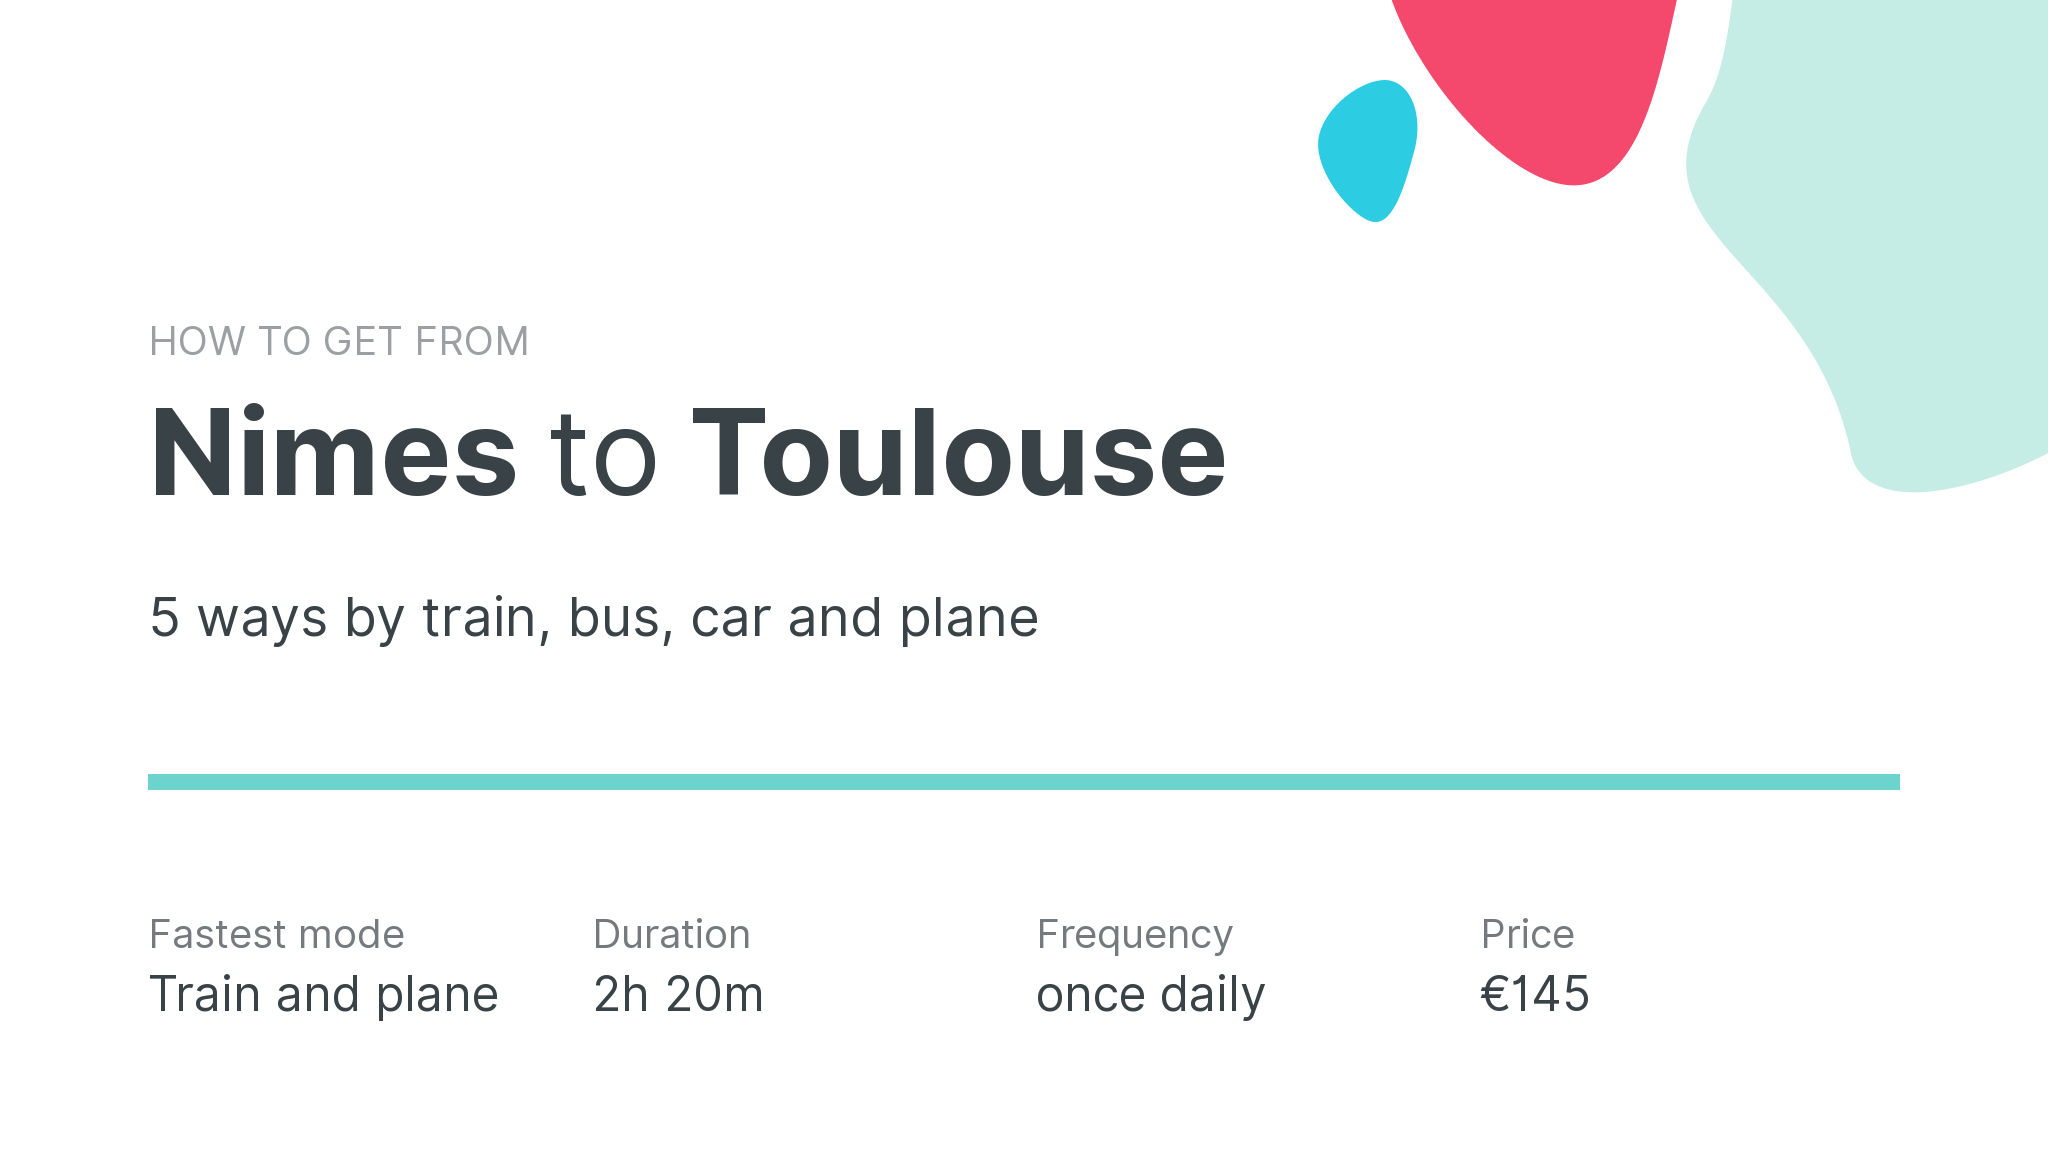 How do I get from Nimes to Toulouse